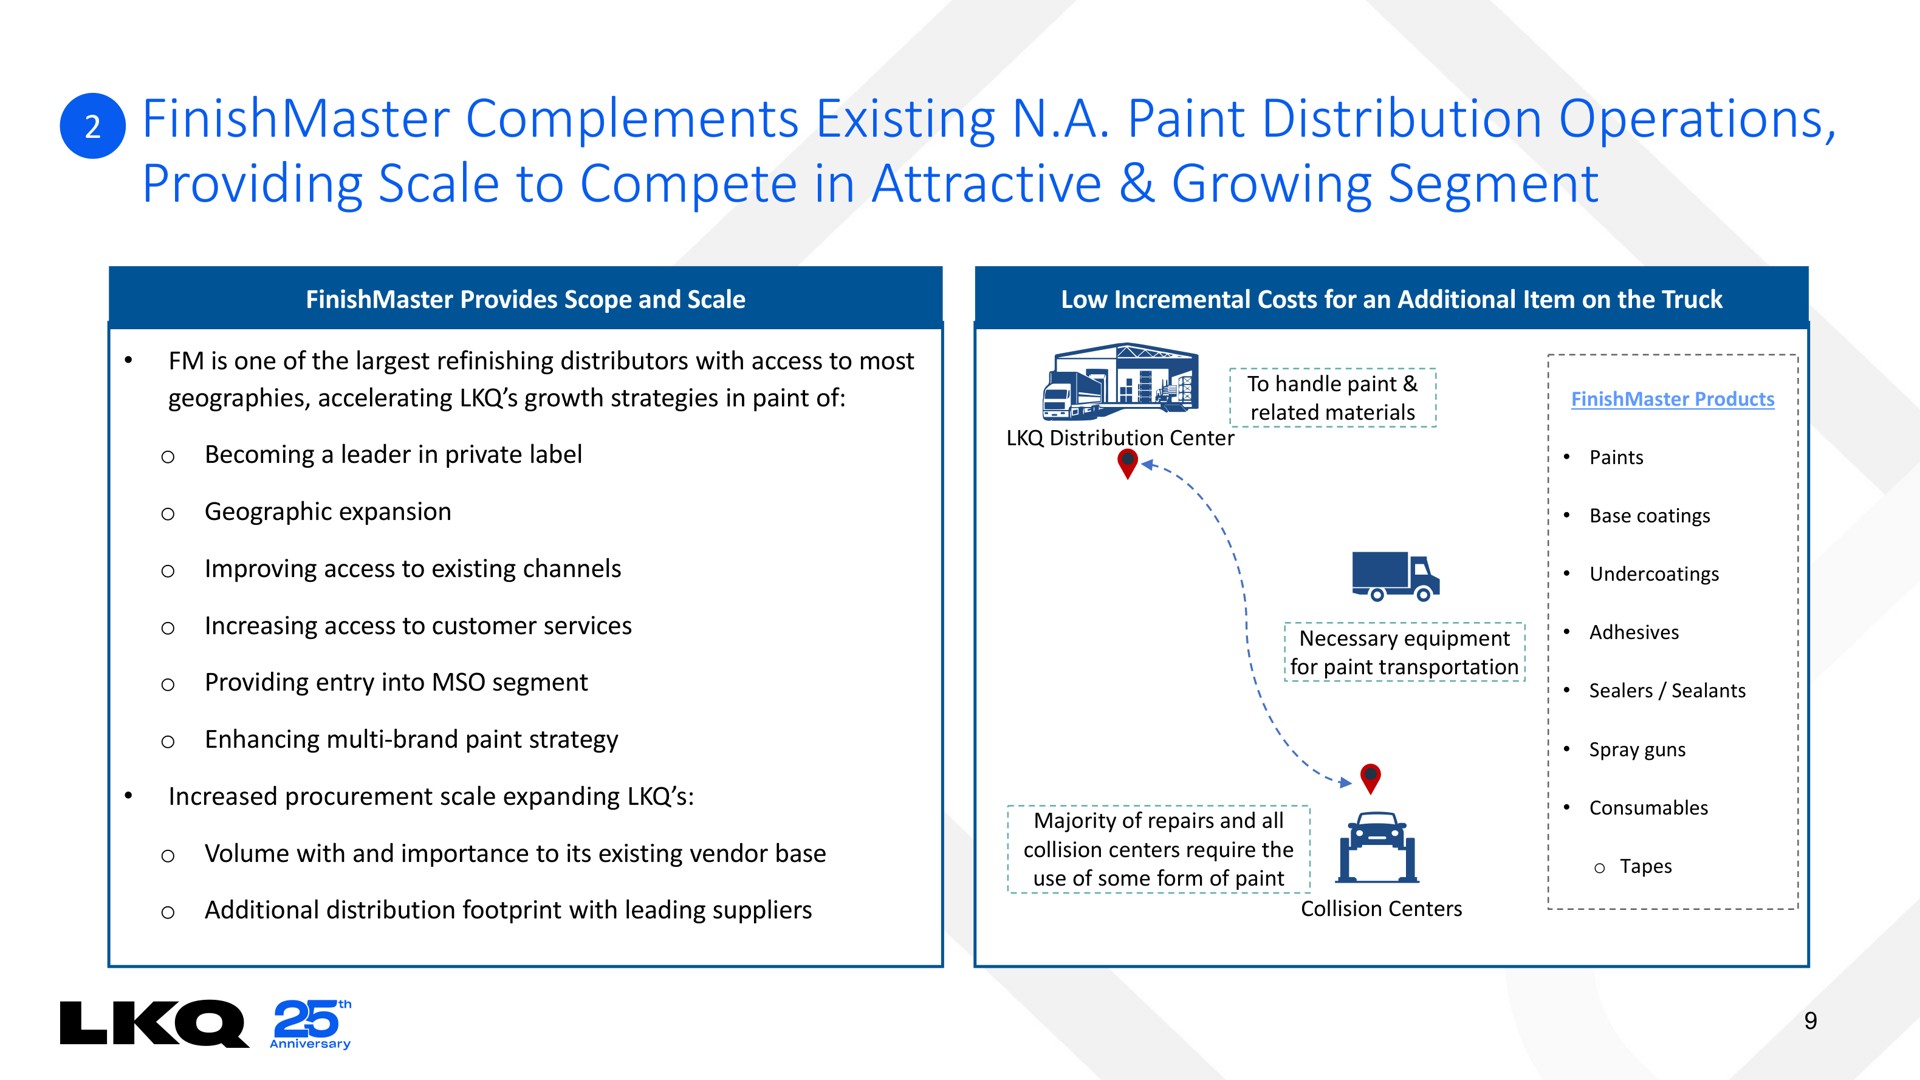 complements existing a paint distribution operations providing scale to compete in attractive growing segment | LKQ